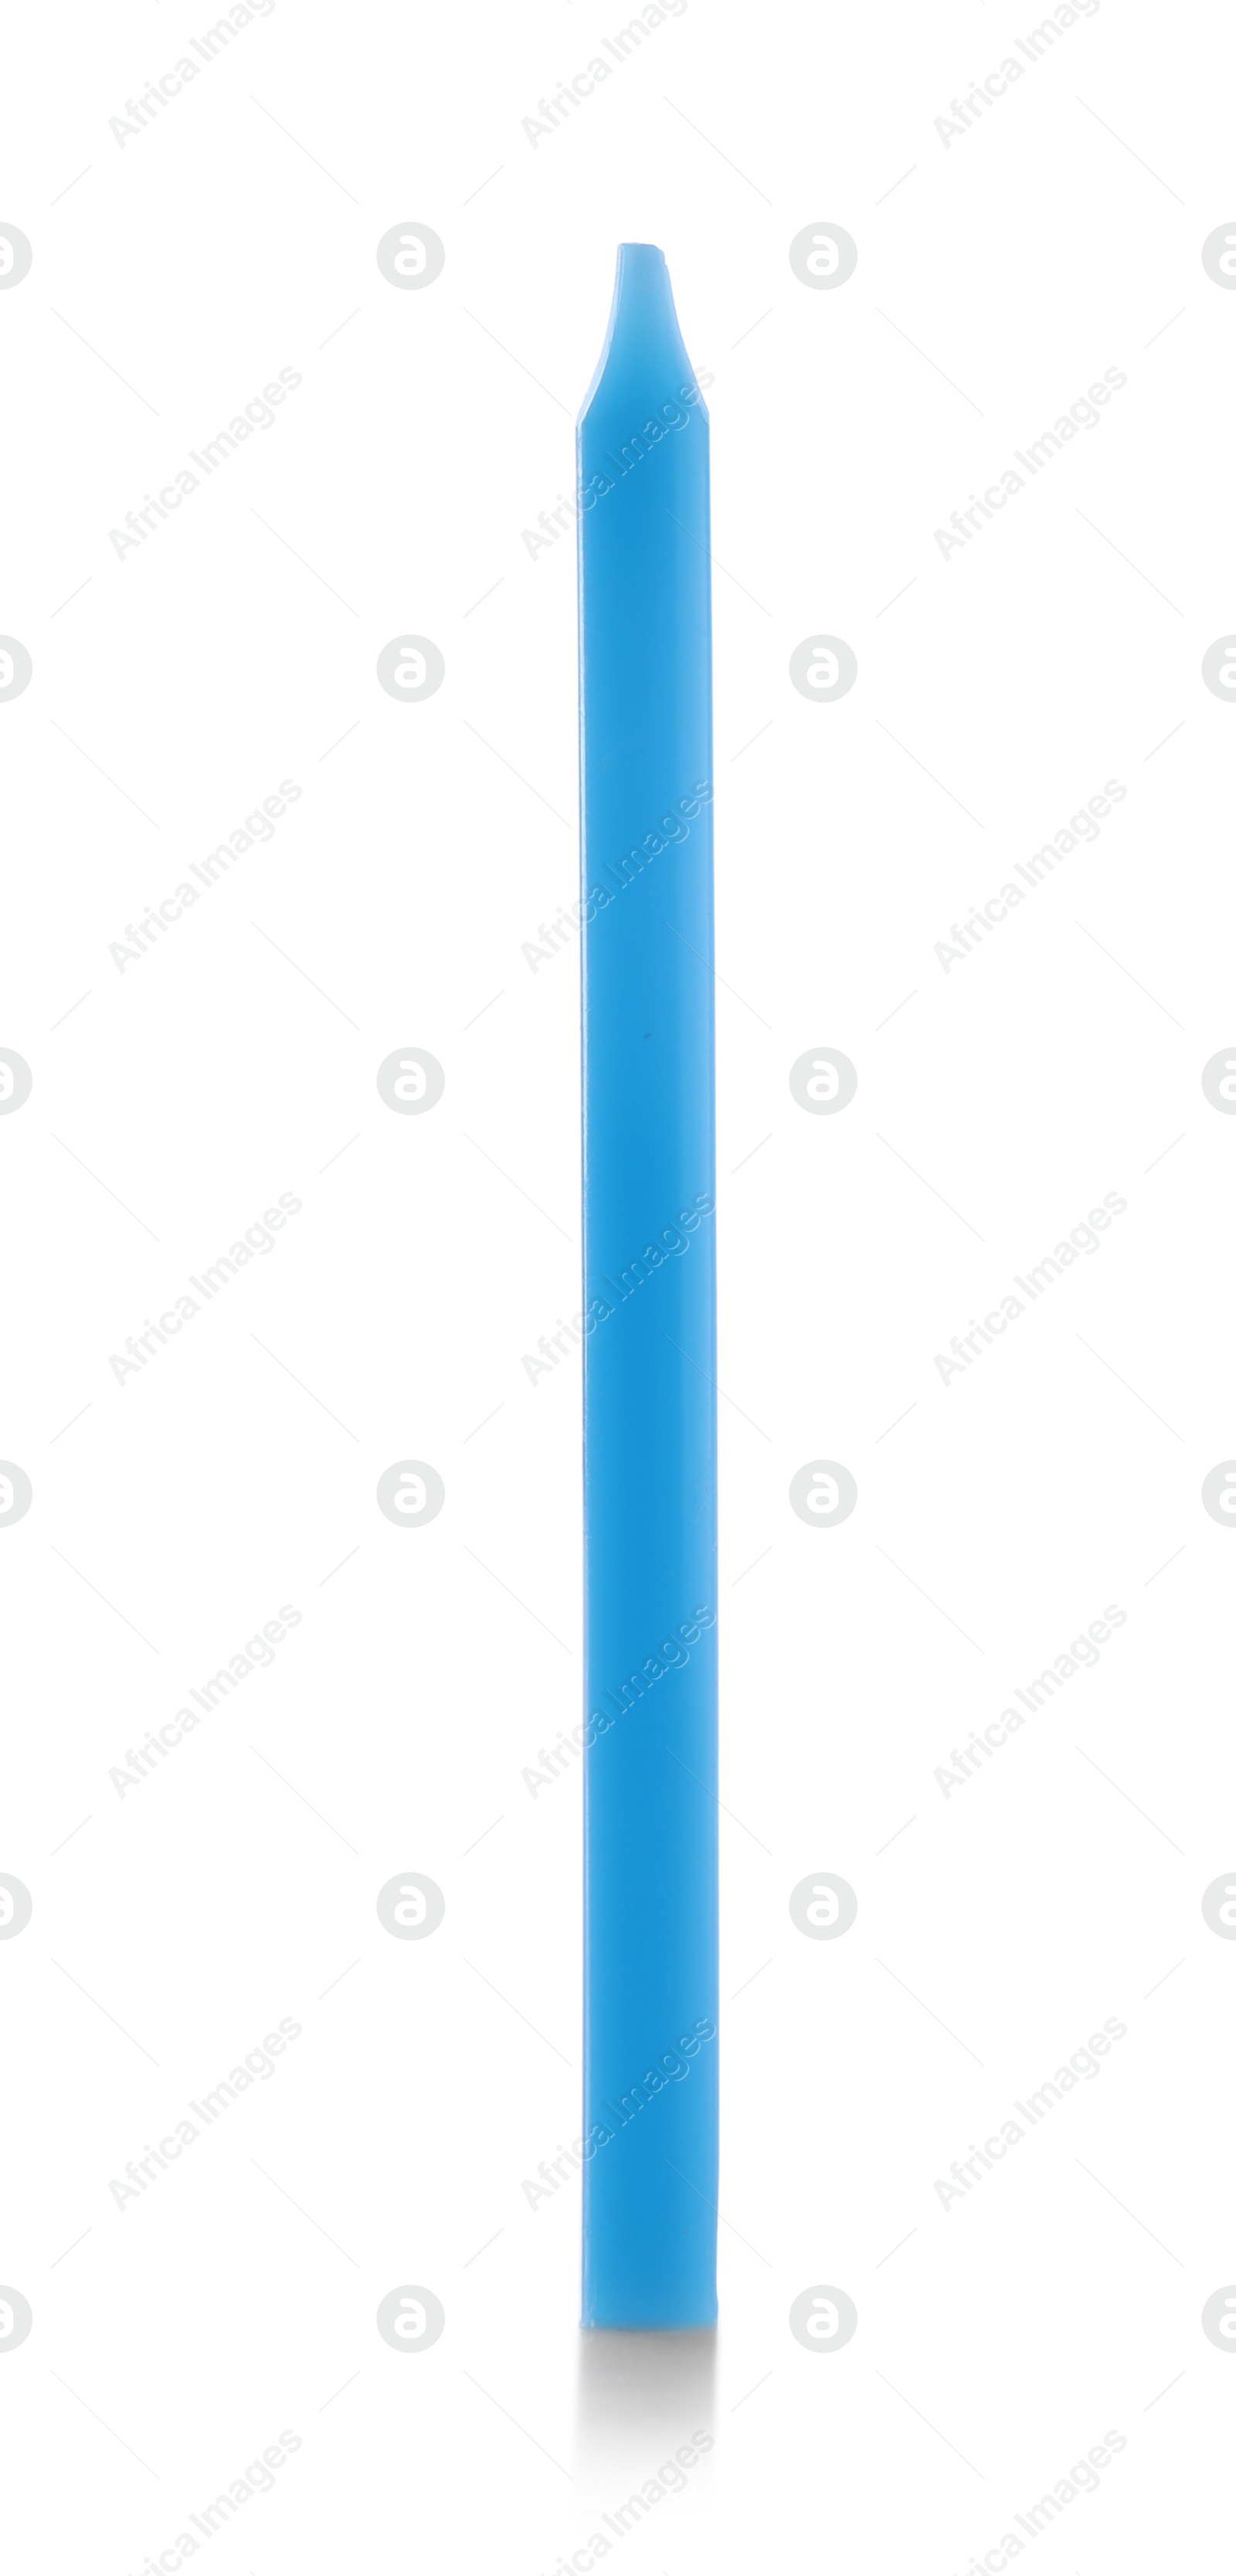 Photo of Thin blue birthday candle isolated on white